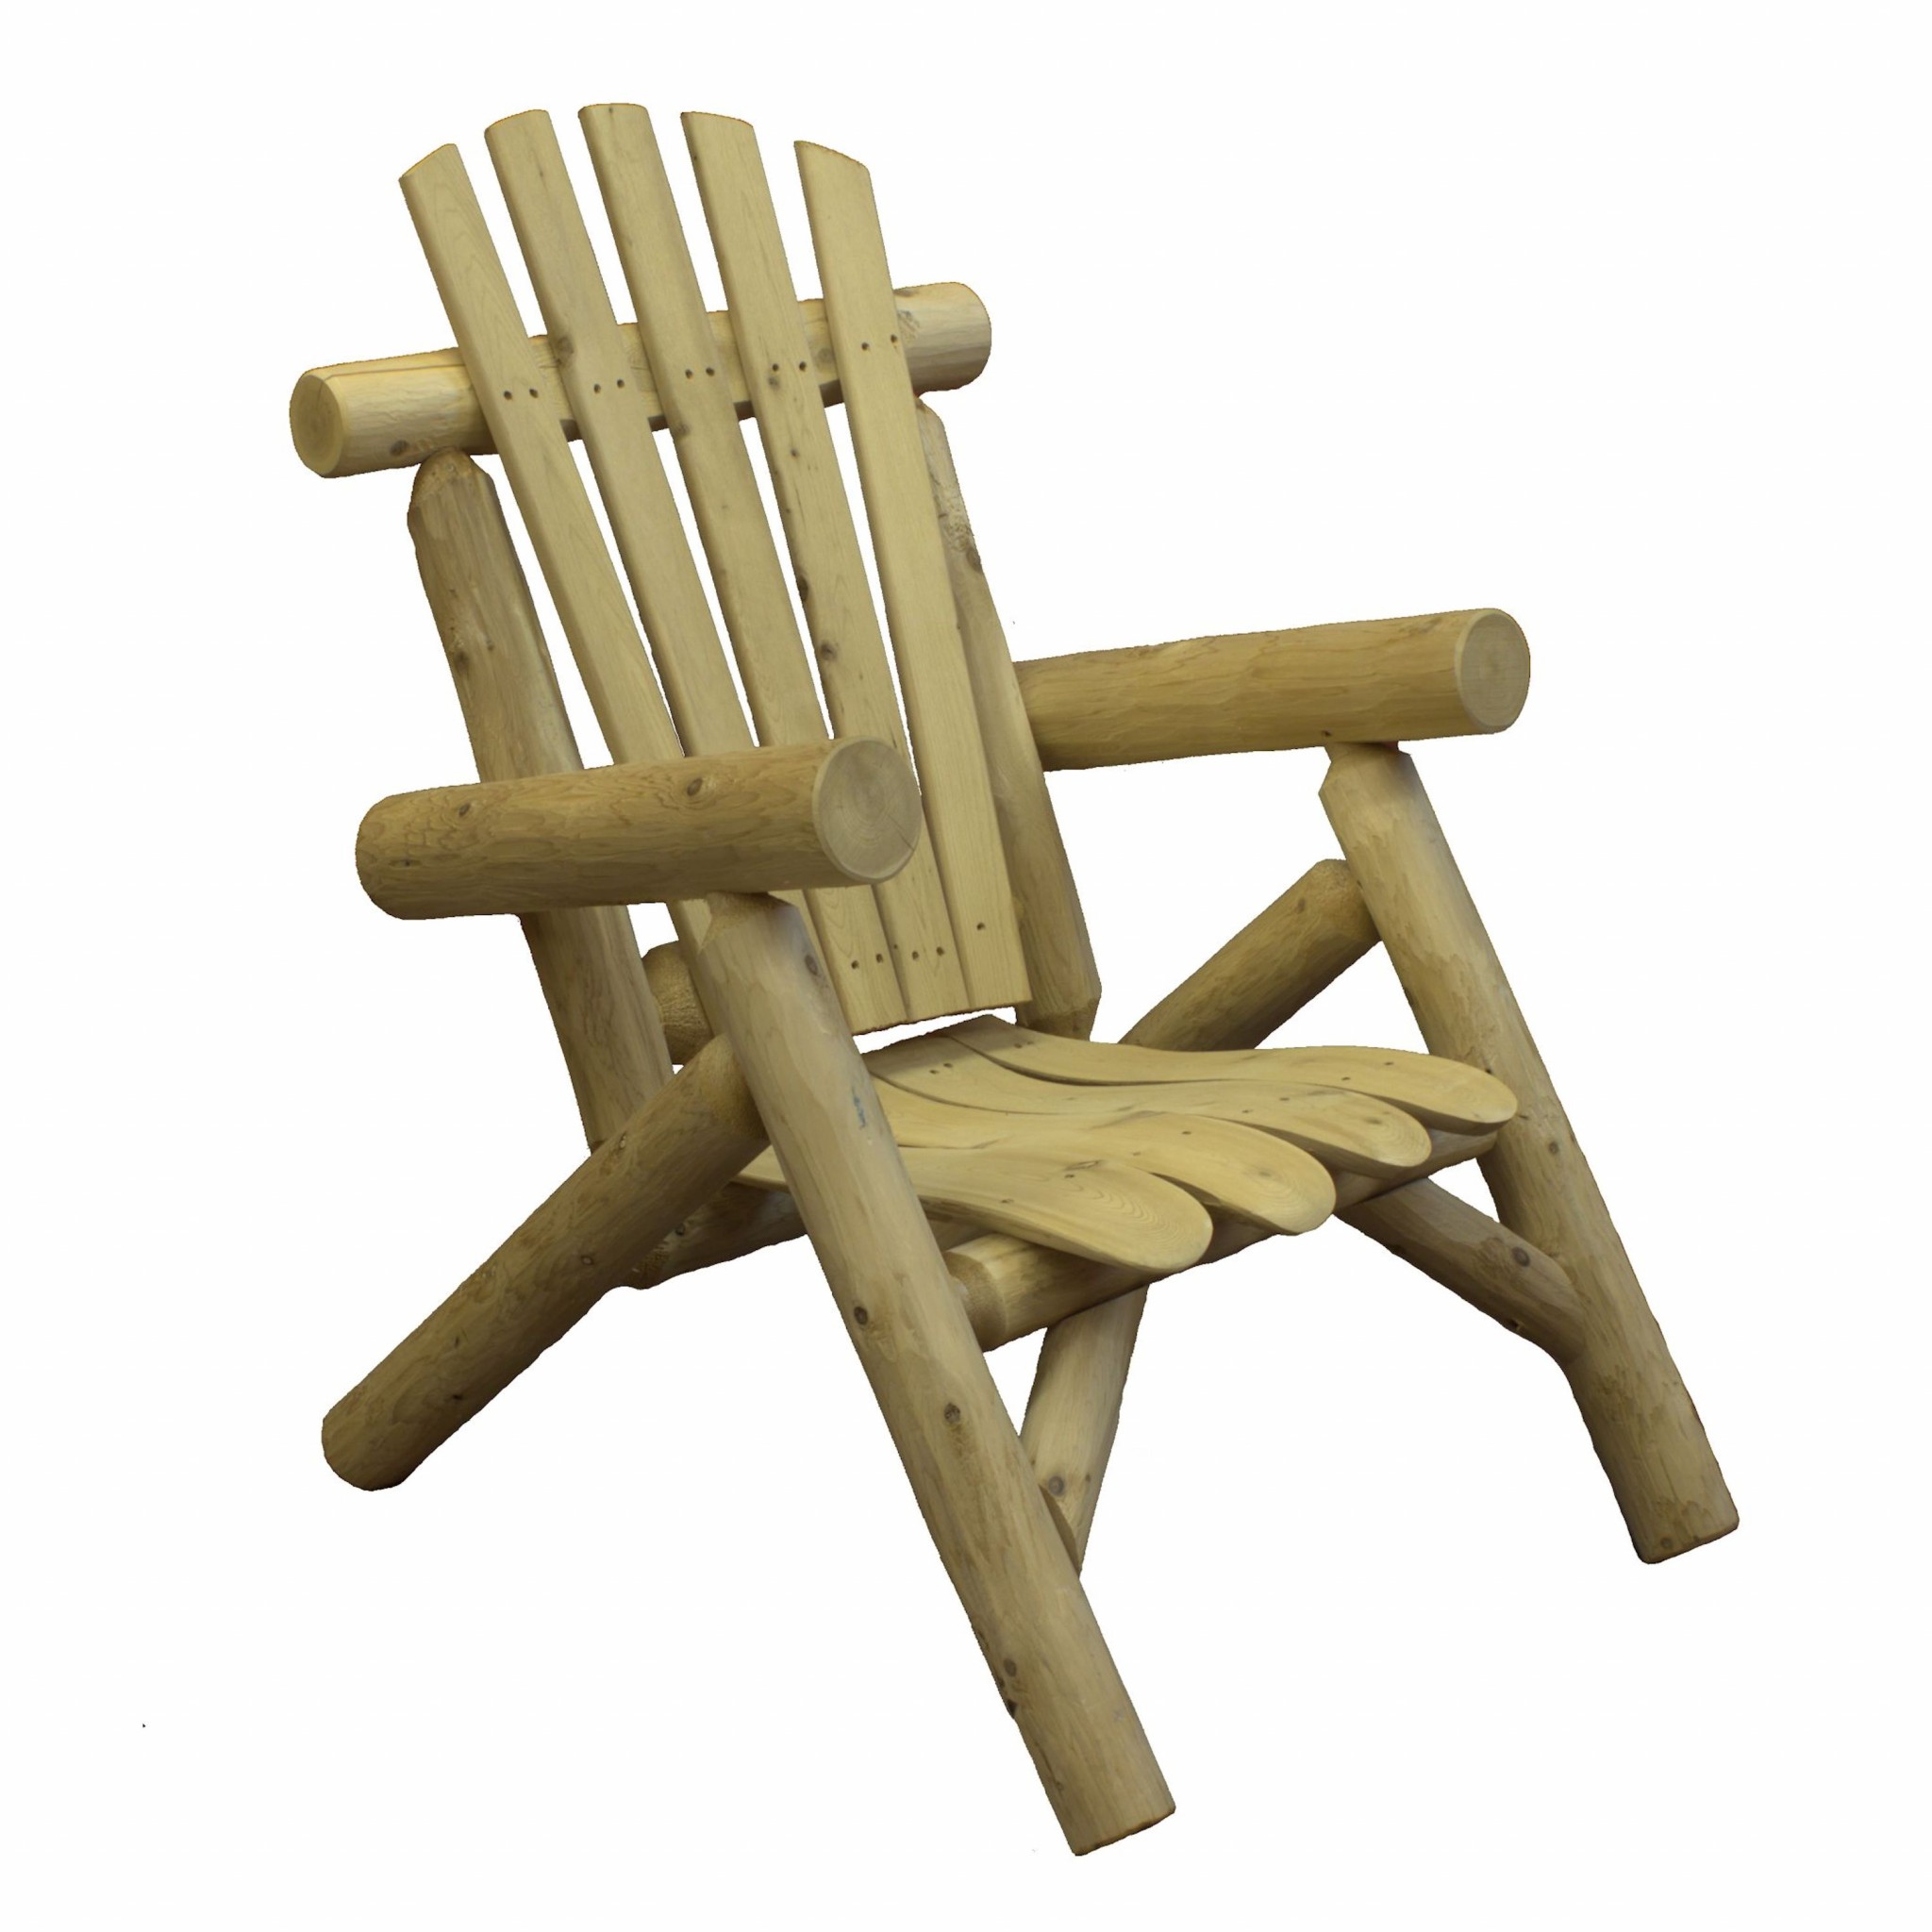 28" X 30" X 39" Natural Wood Lounge Chair